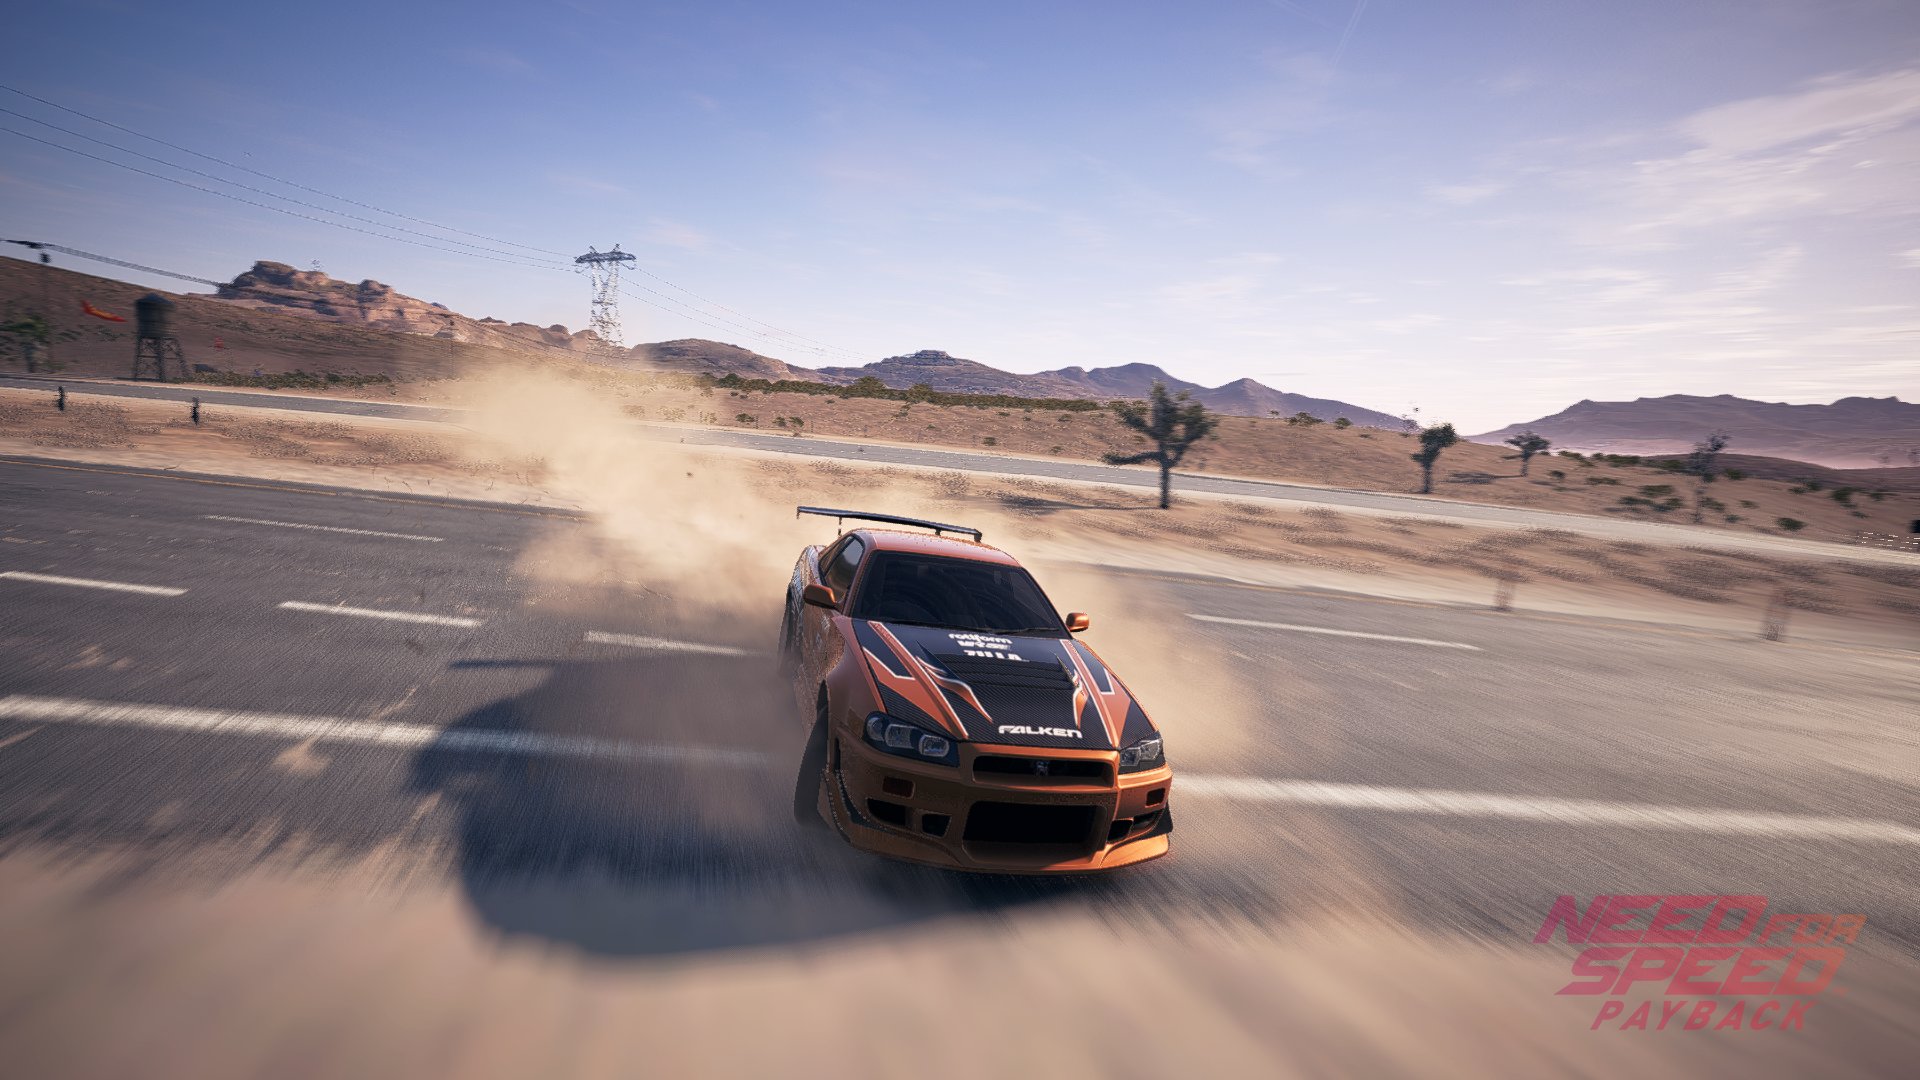 nfs payback abandoned car march 2019 march